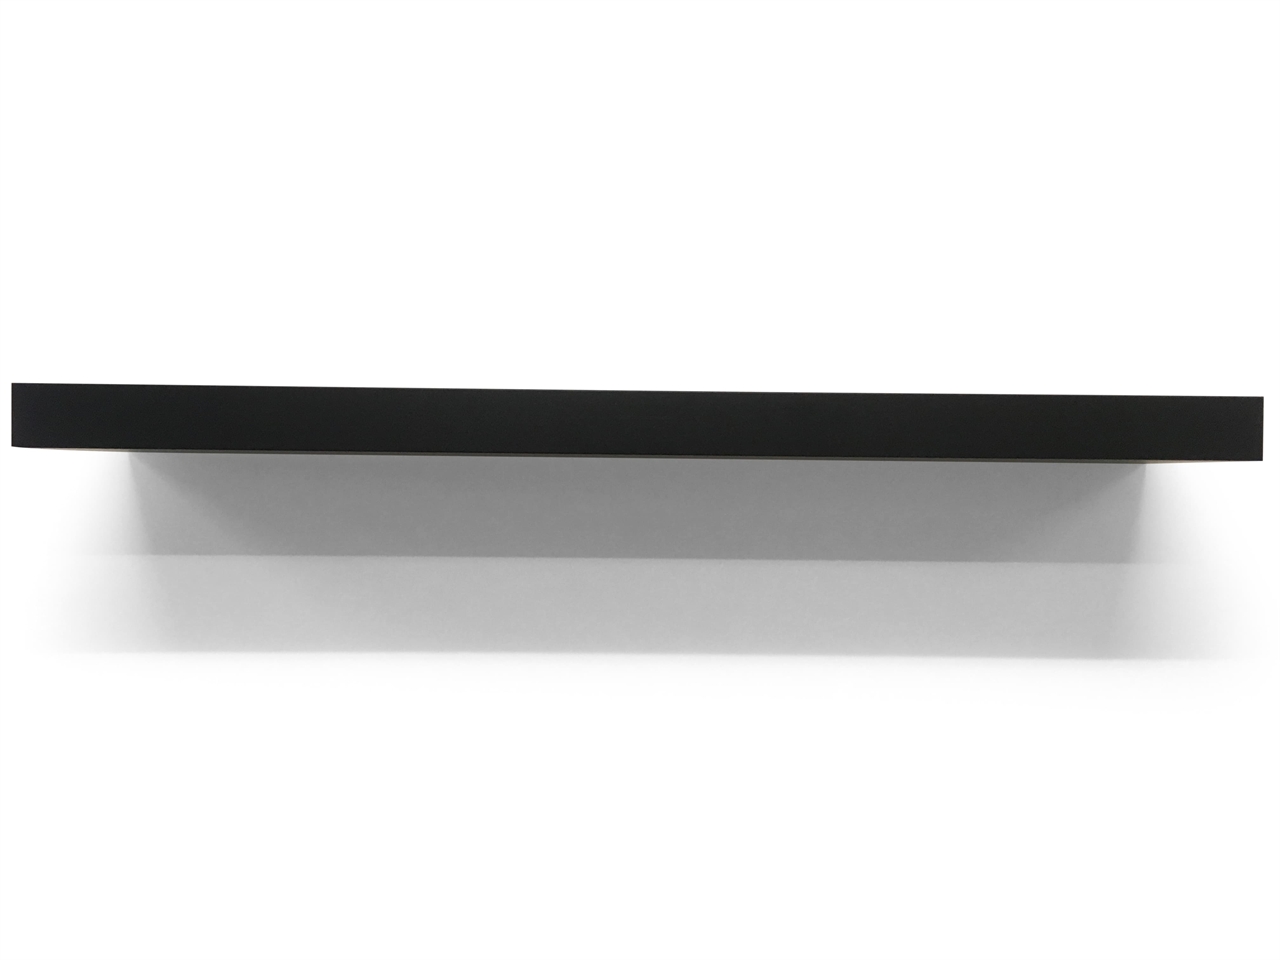 top shelf gallery floating shelves high gloss white chunky matt black laminated thick deep long hardware glass support rails heavy duty pins ikea storage unit expedit boxes